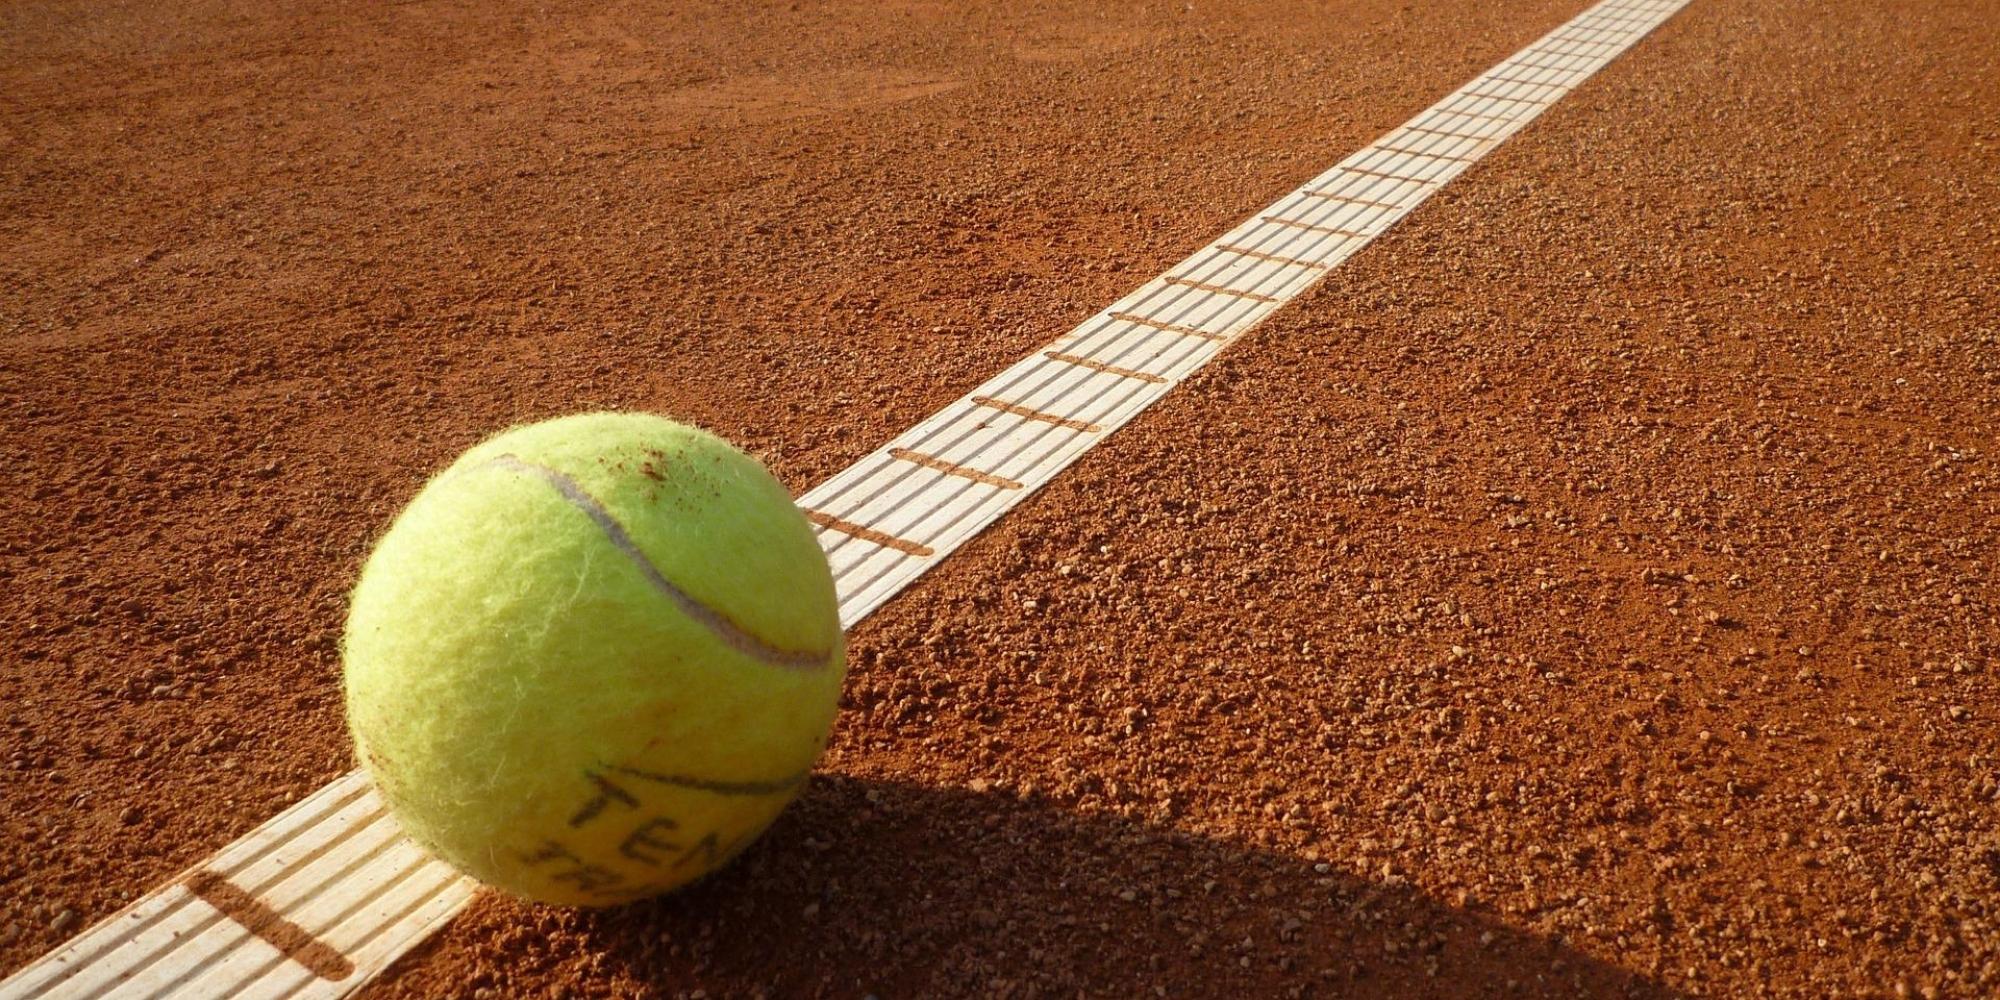 Roland Garros 2022 broadcast: How to watch the matches for free on